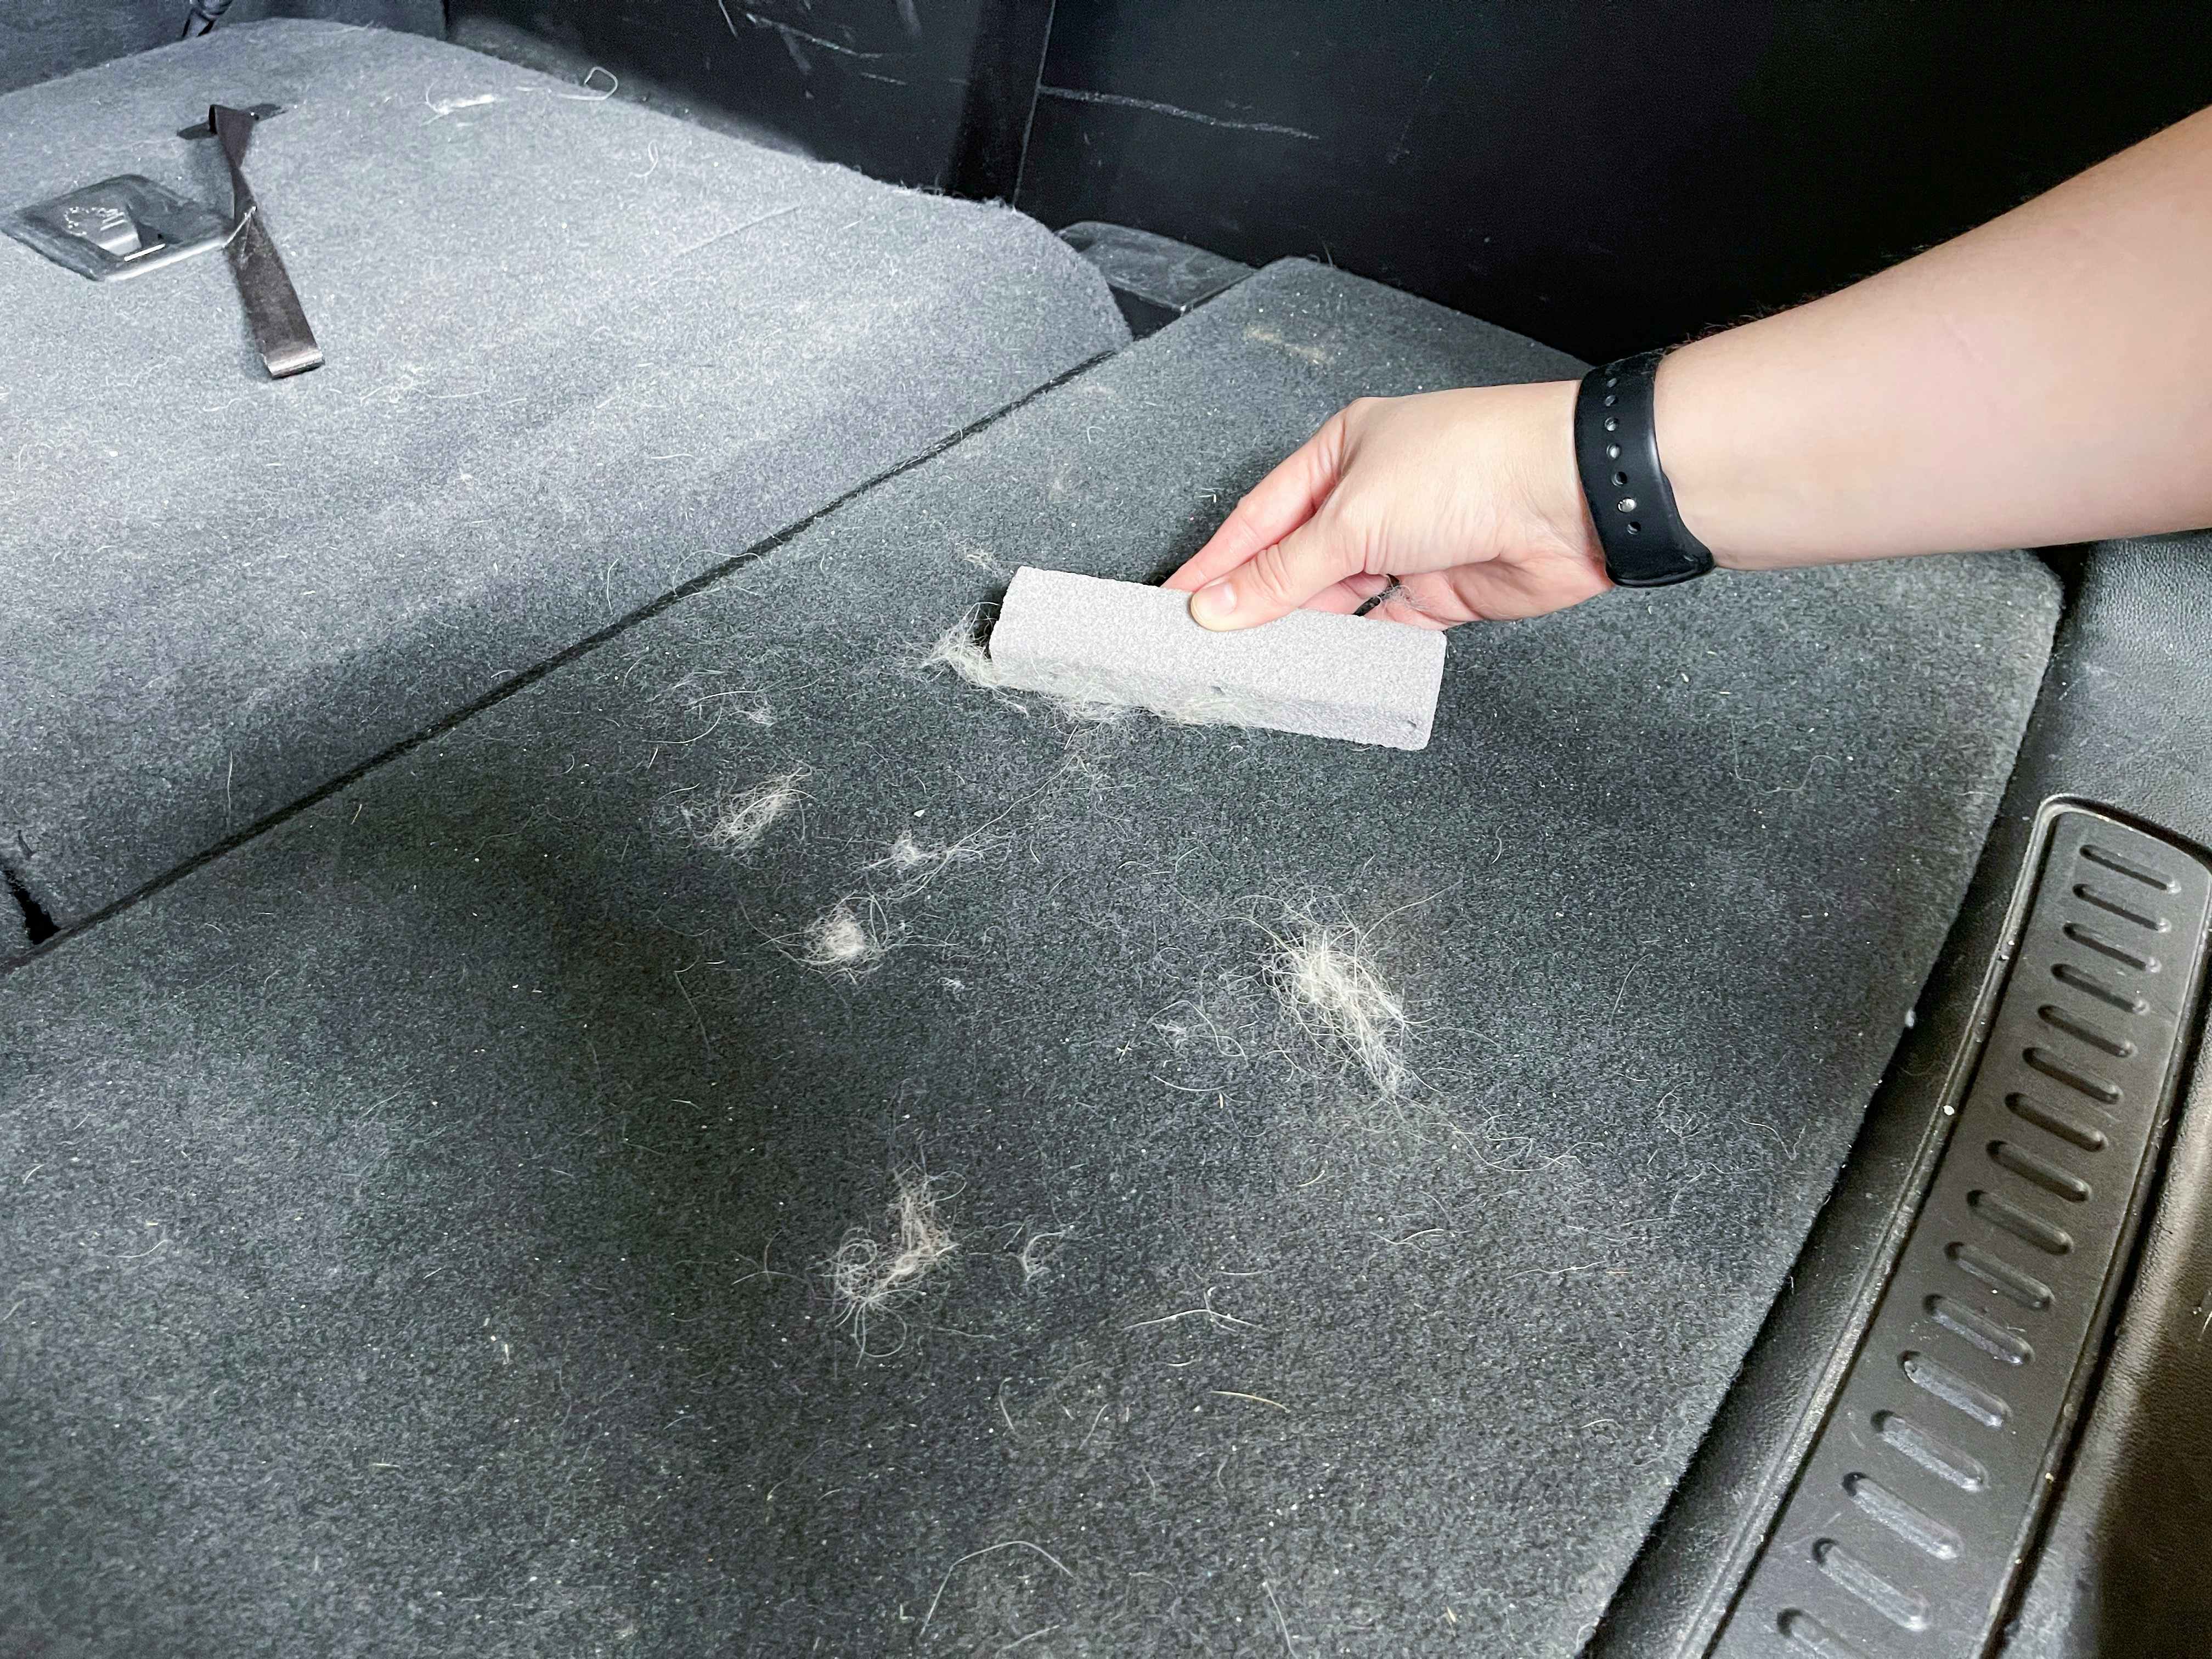 using a pumice stone to pick up pet hair in car